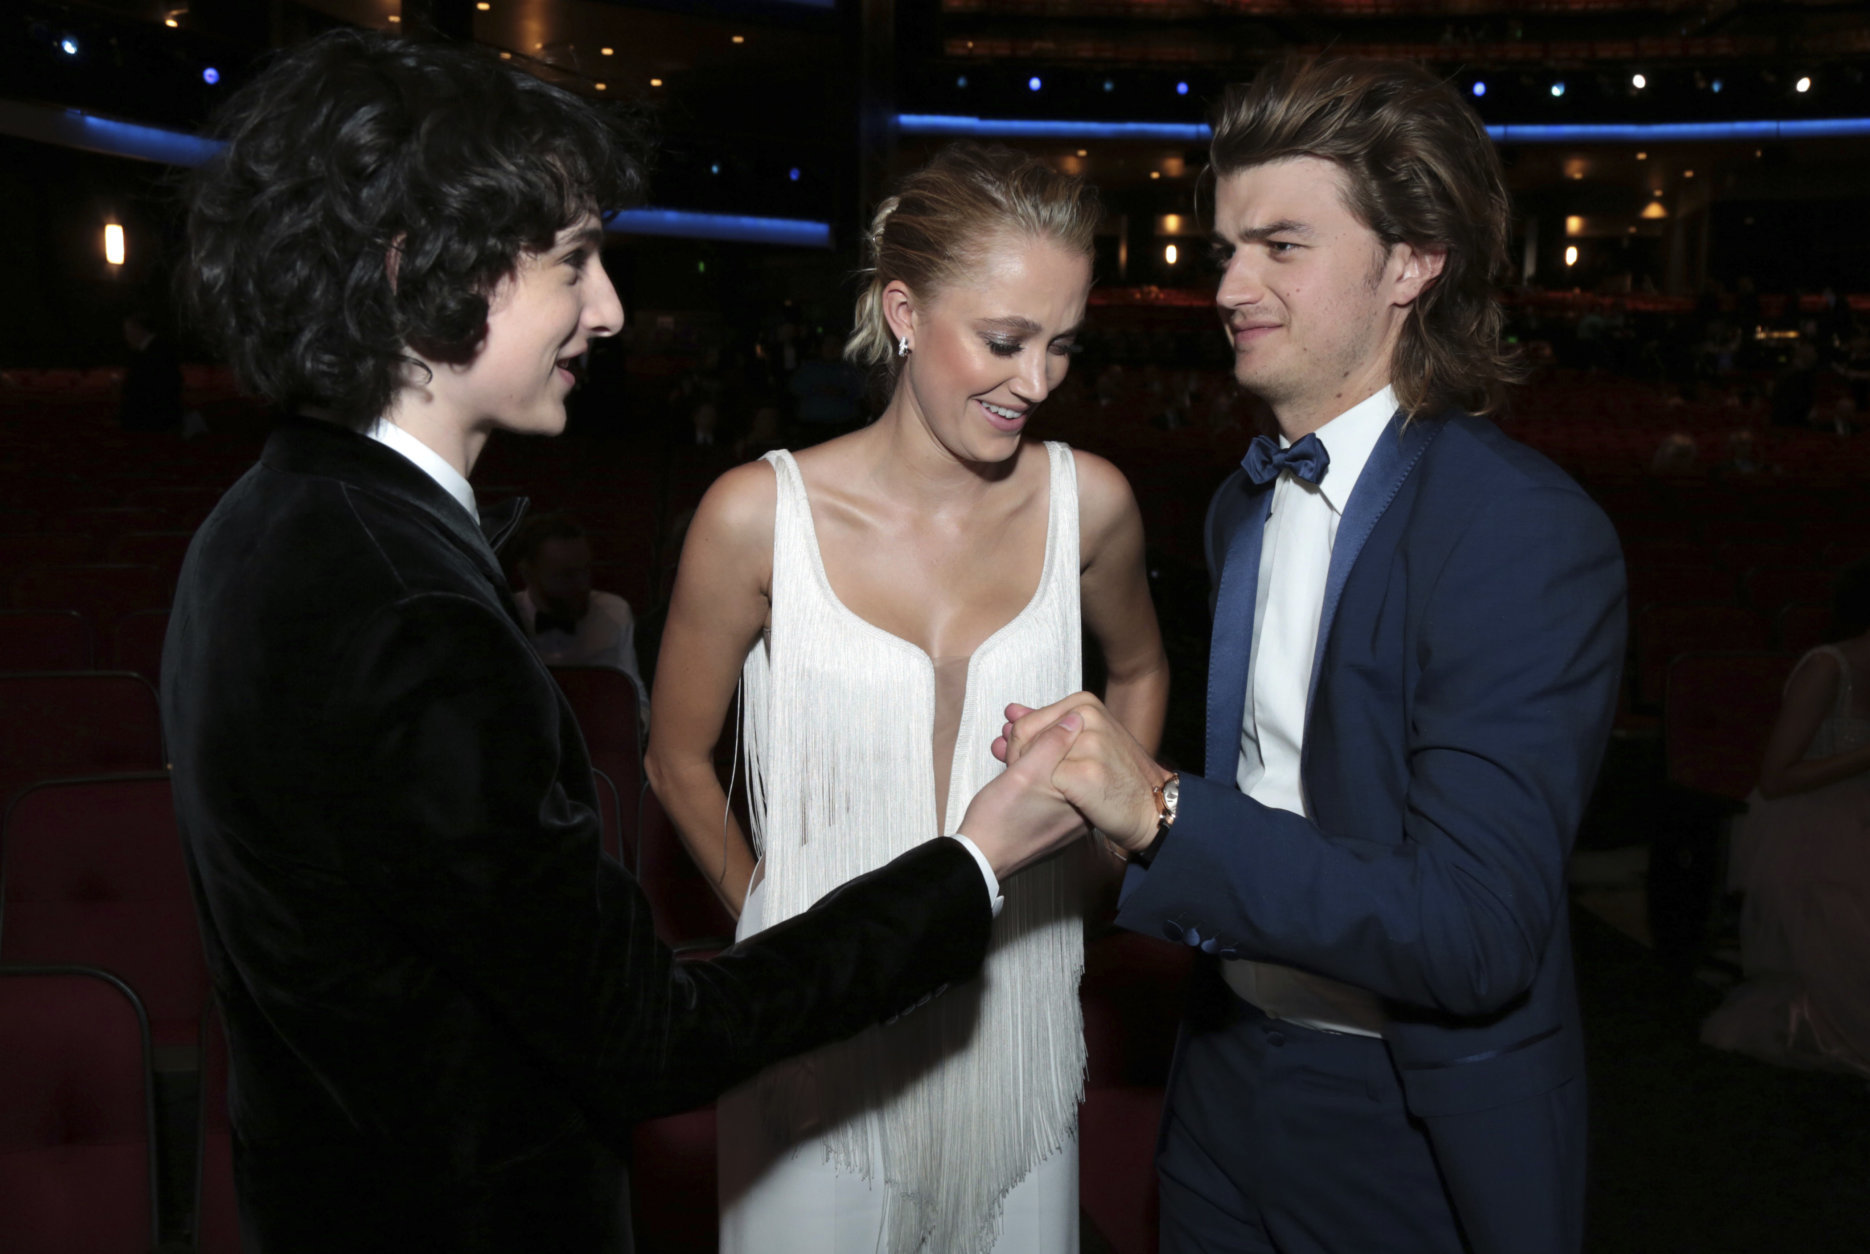 IMAGE DISTRIBUTED FOR THE TELEVISION ACADEMY - Finn Wolfhard, Maika Monroe and Joe Keery at the 70th Primetime Emmy Awards on Monday, Sept. 17, 2018, at the Microsoft Theater in Los Angeles. (Photo by Alex Berliner/Invision for the Television Academy/AP Images)